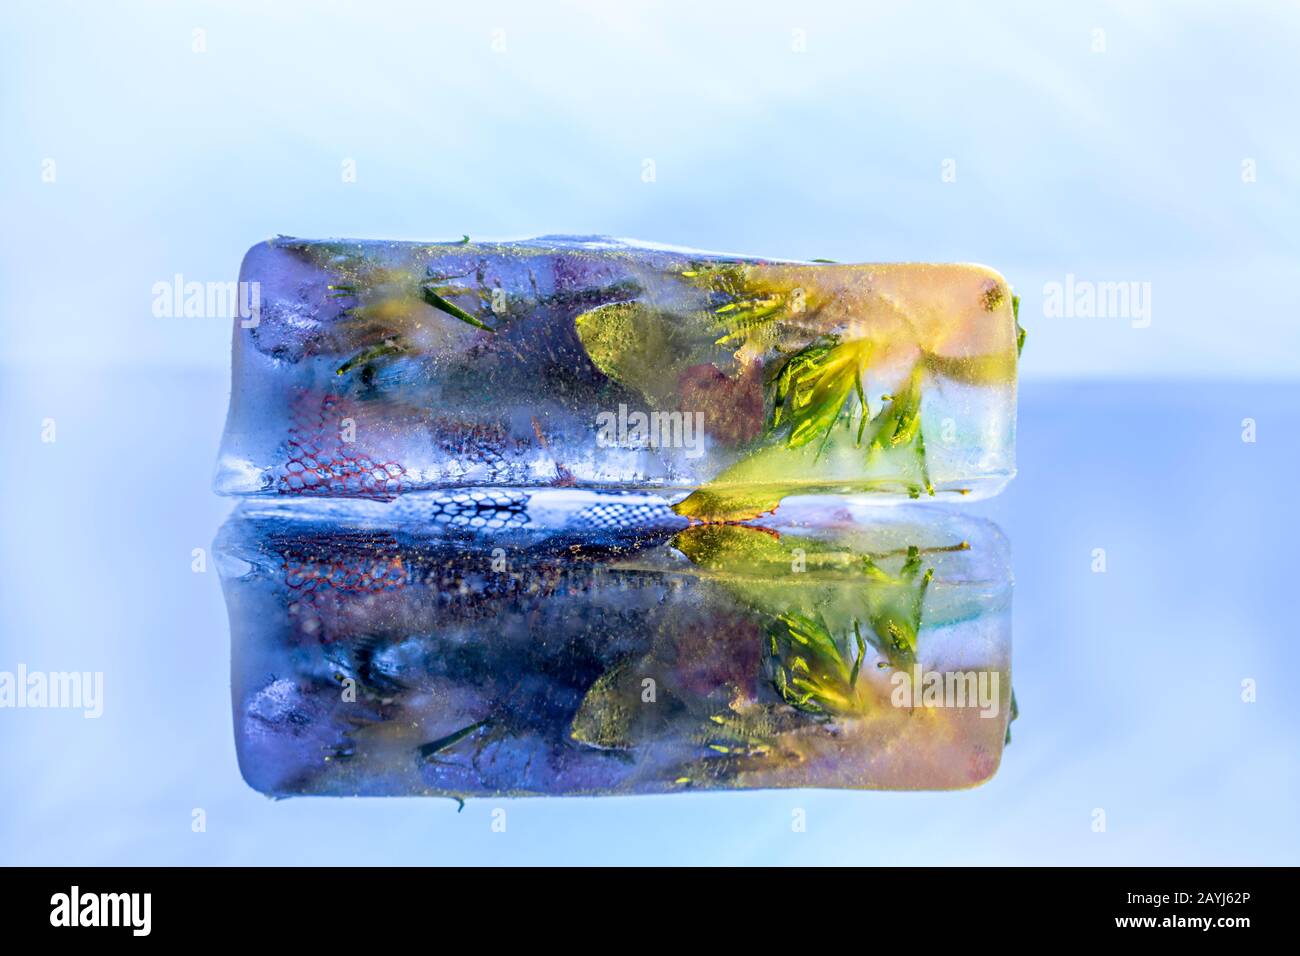 Frozen flowers in ice block crystal on reflective blue surface Stock Photo